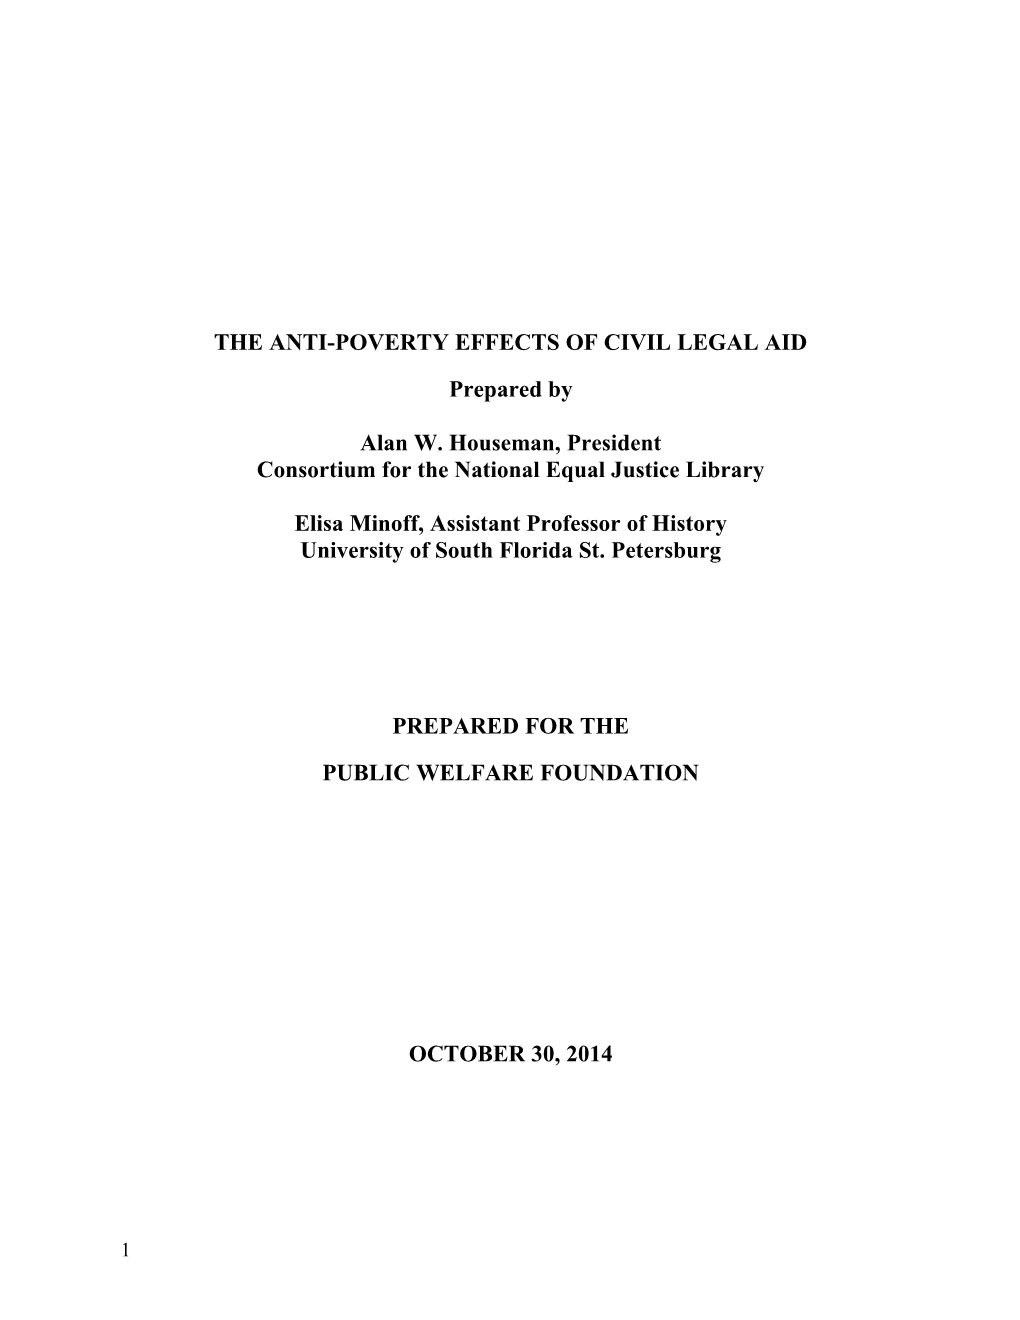 The Anti-Poverty Effects of Civil Legal Aid